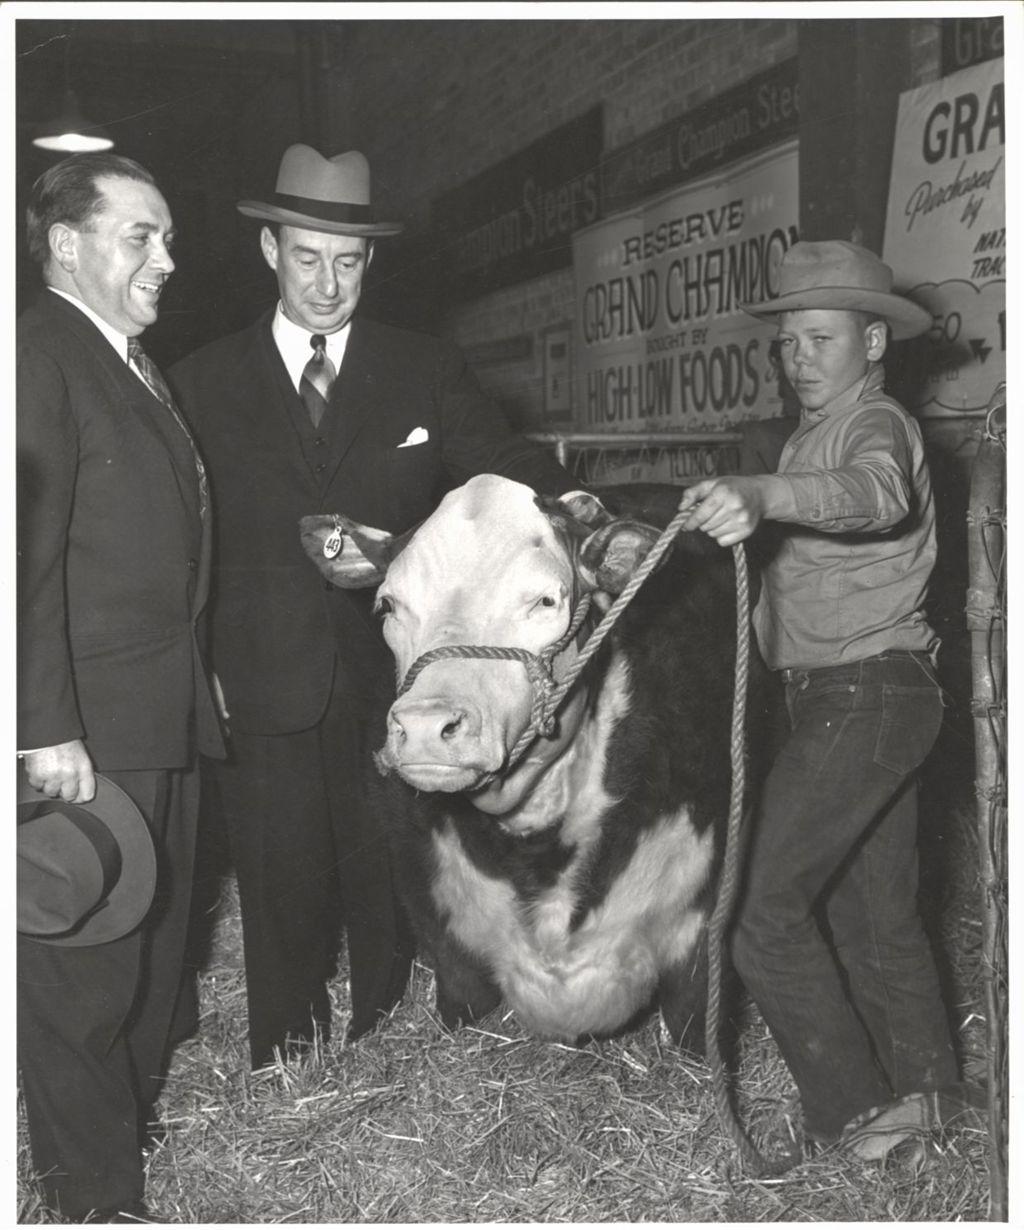 Showing off a steer to Richard J. Daley and Adlai Stevenson II